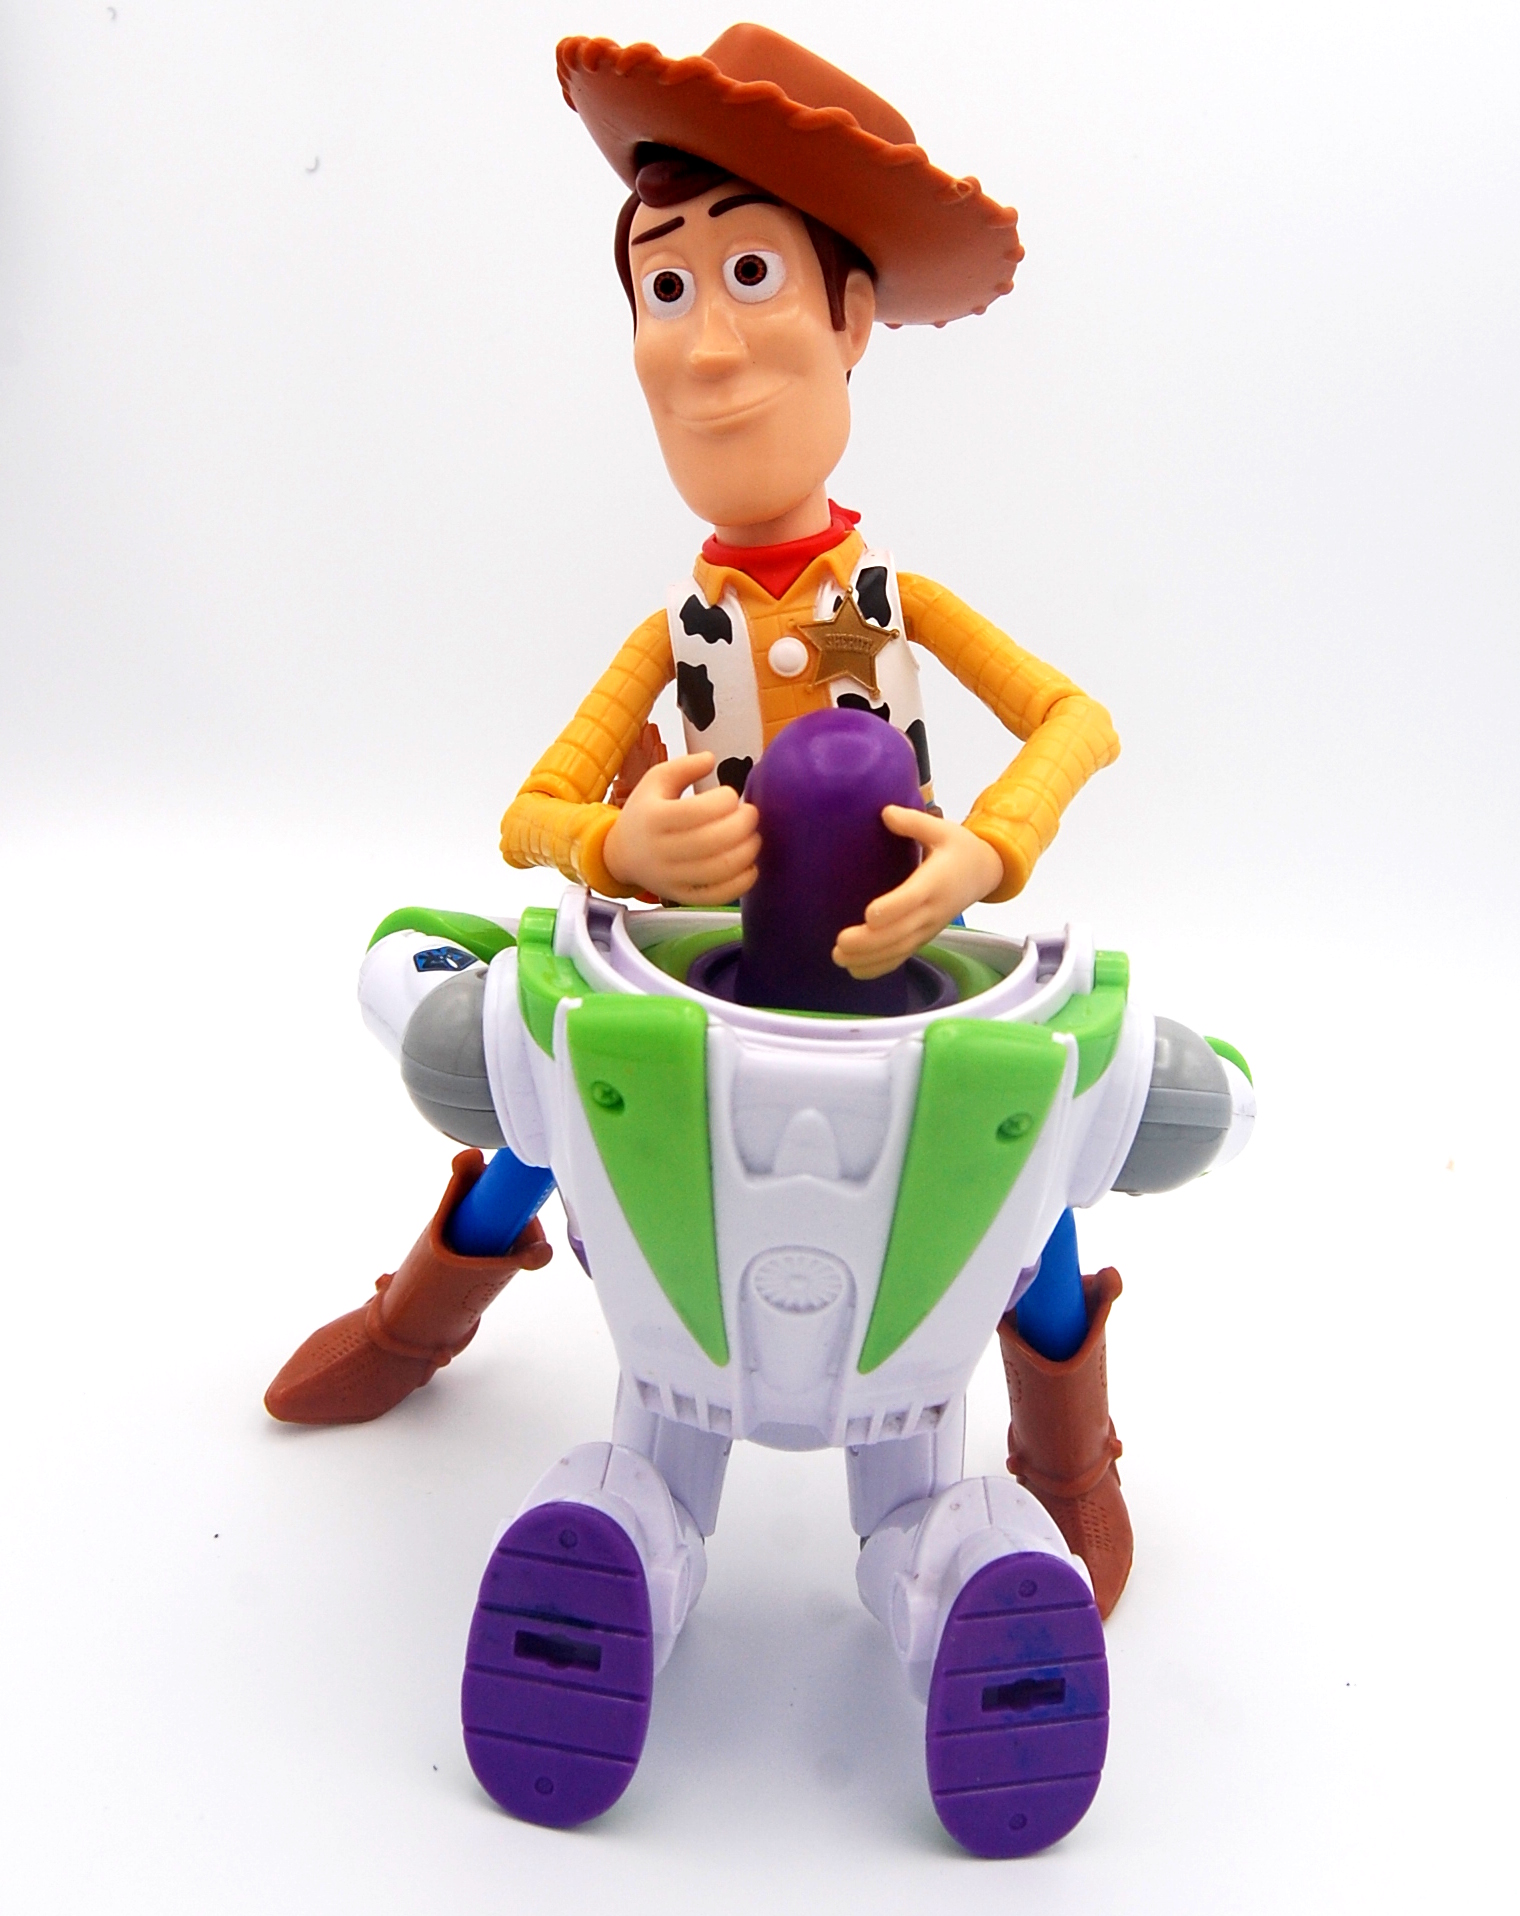 buzz giving woody a blowjob